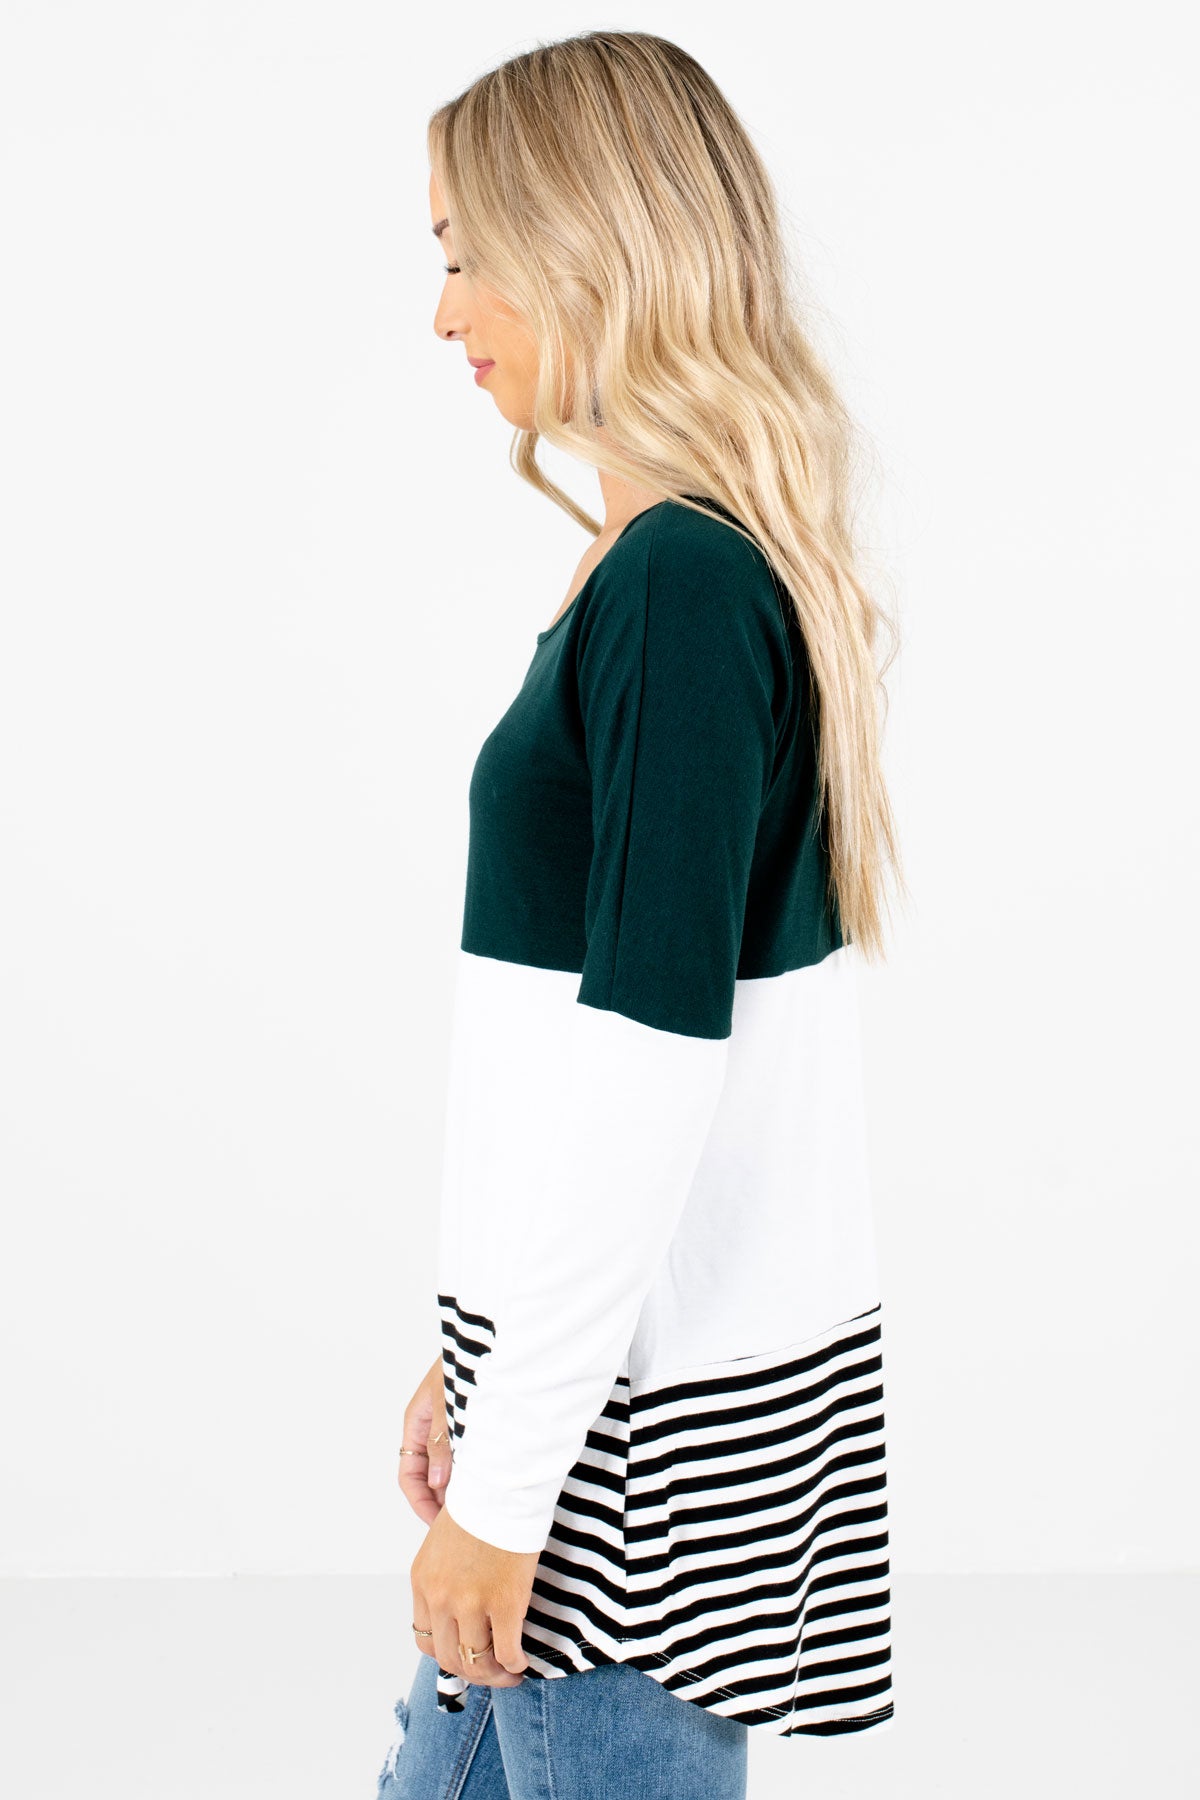 Teal Long Sleeve Boutique Tops for Women